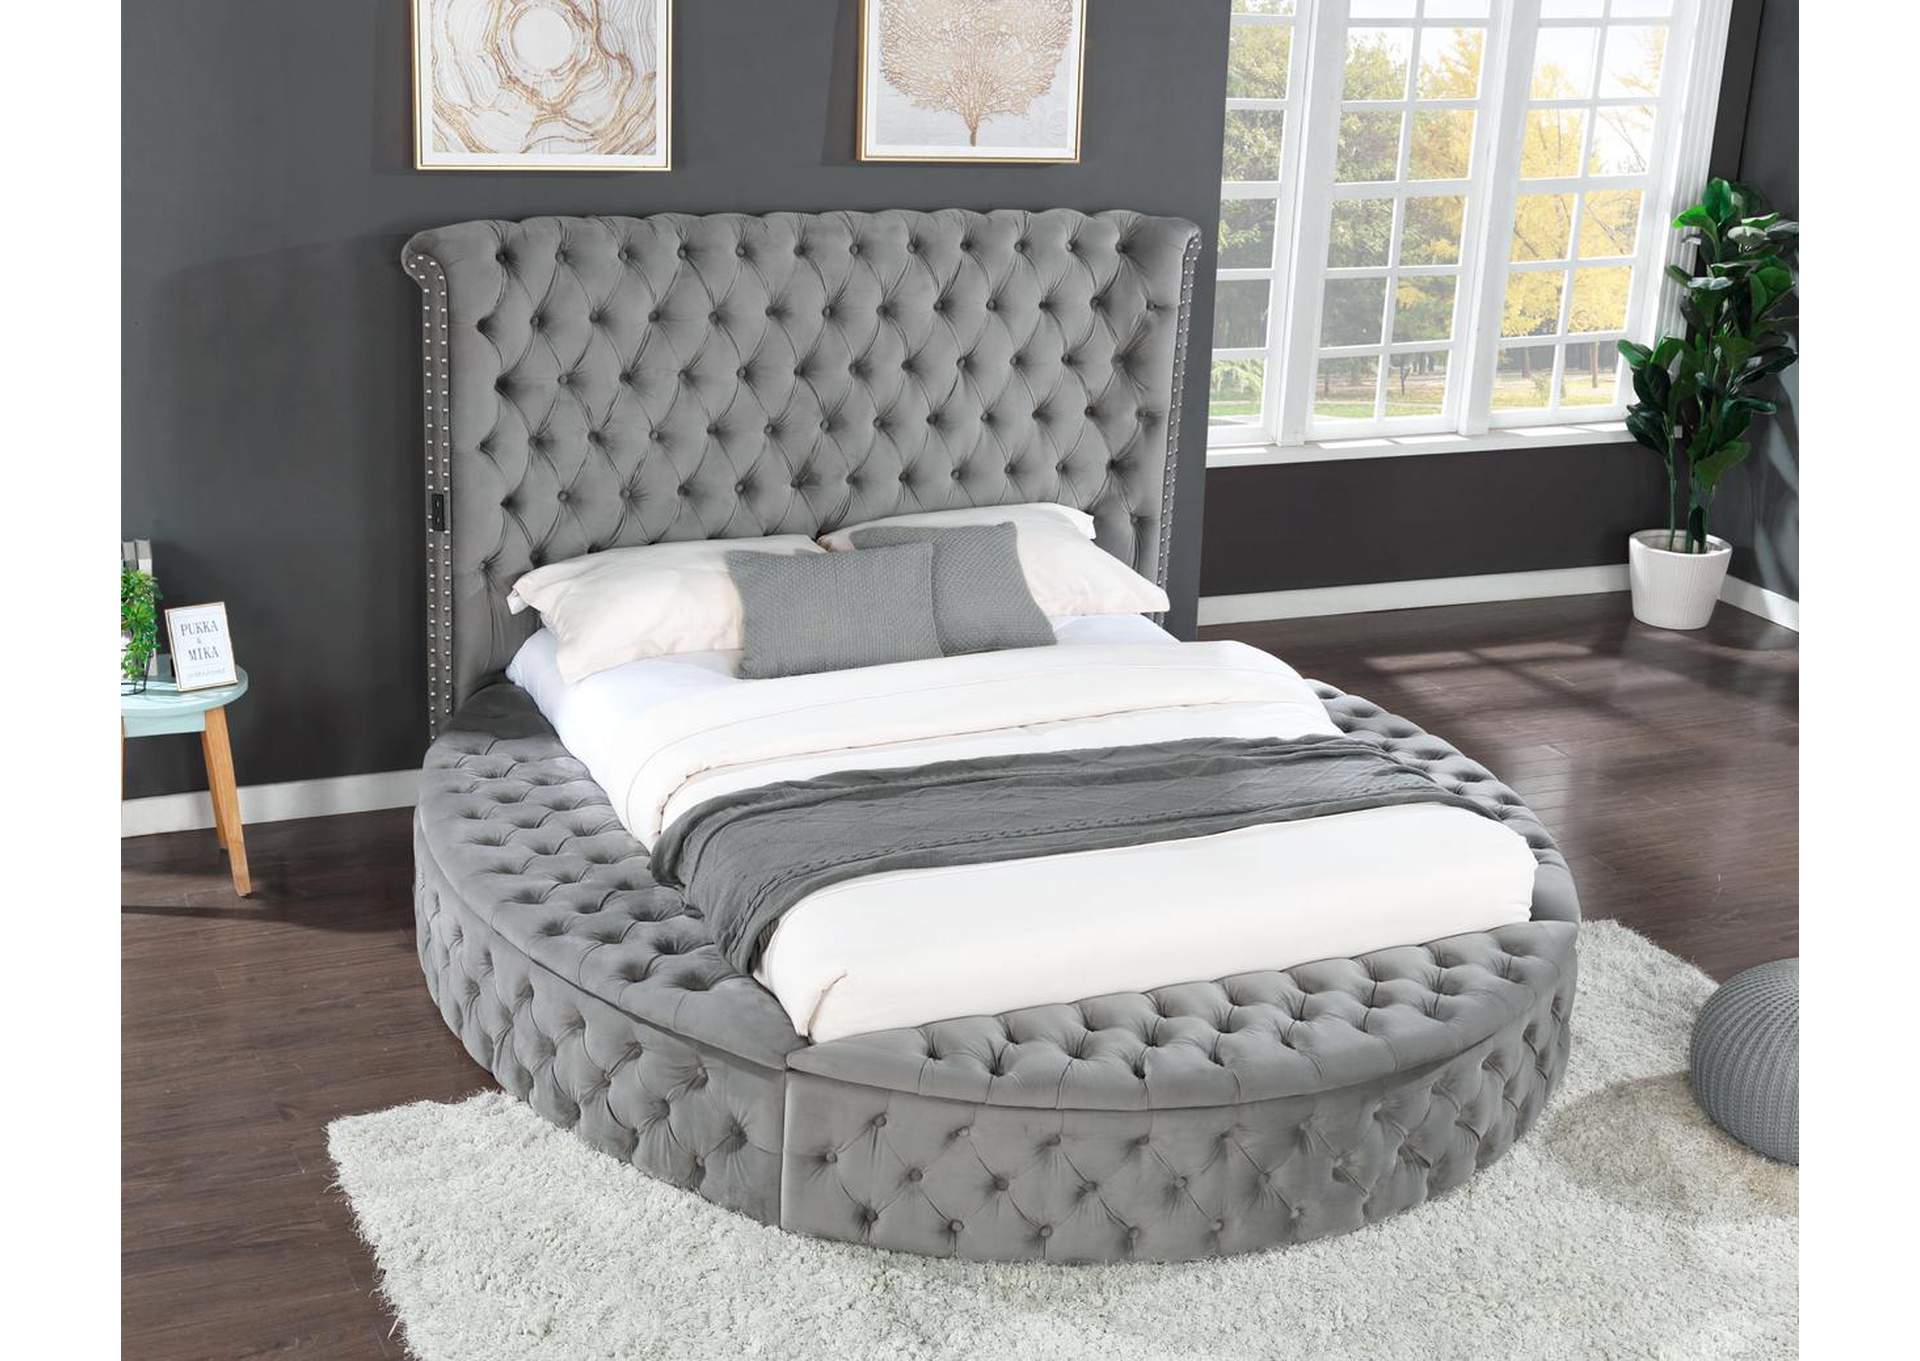 Click here for King Beds